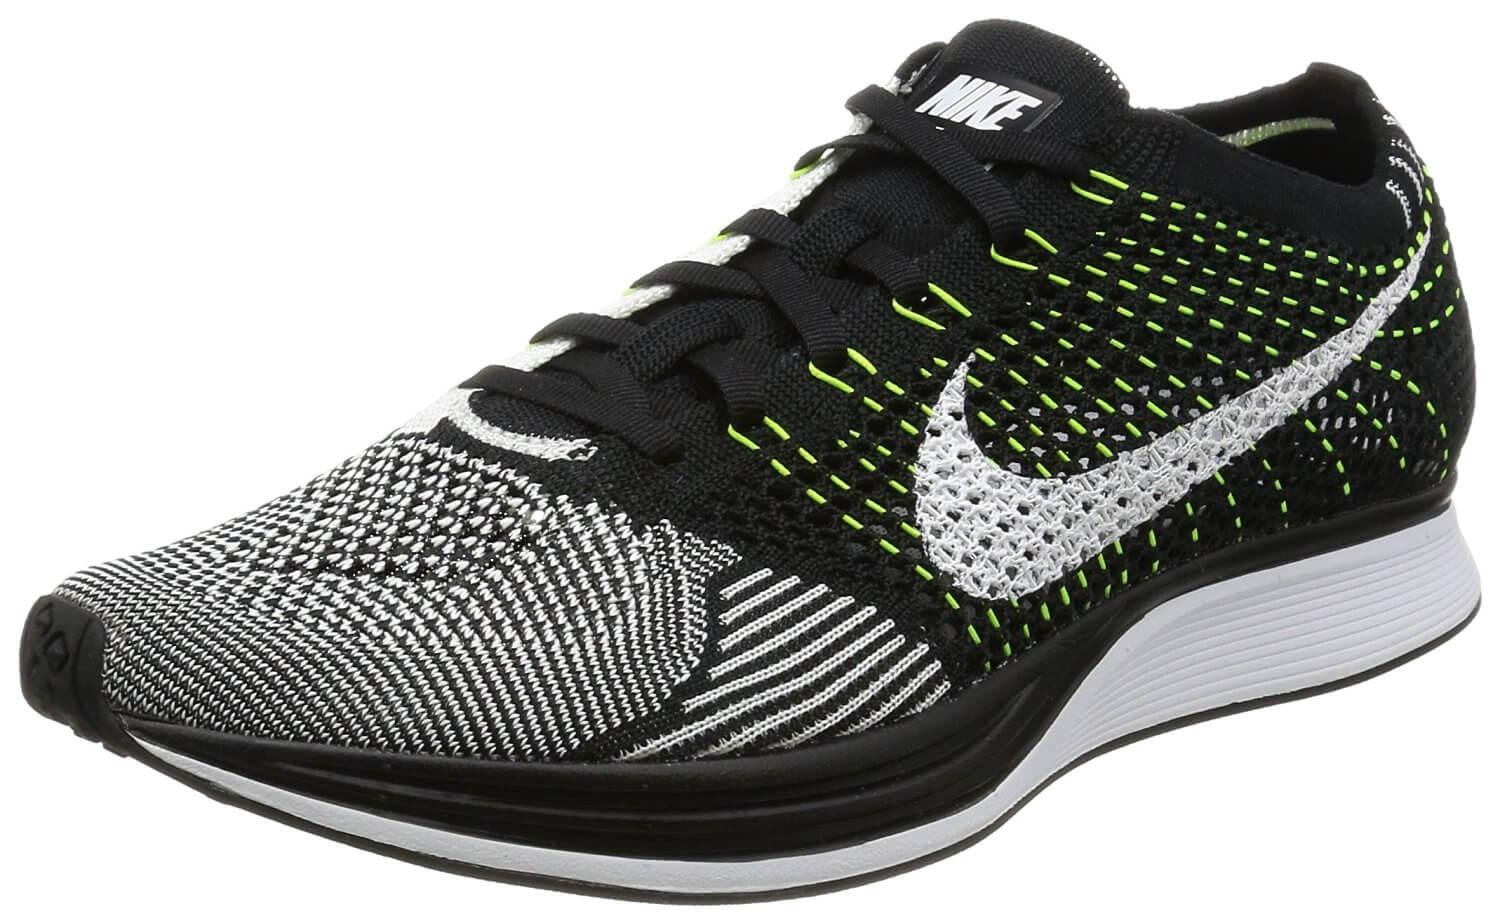 Nike Flyknit Racer Reviewed, Tested and in 2022 | RunnerClick